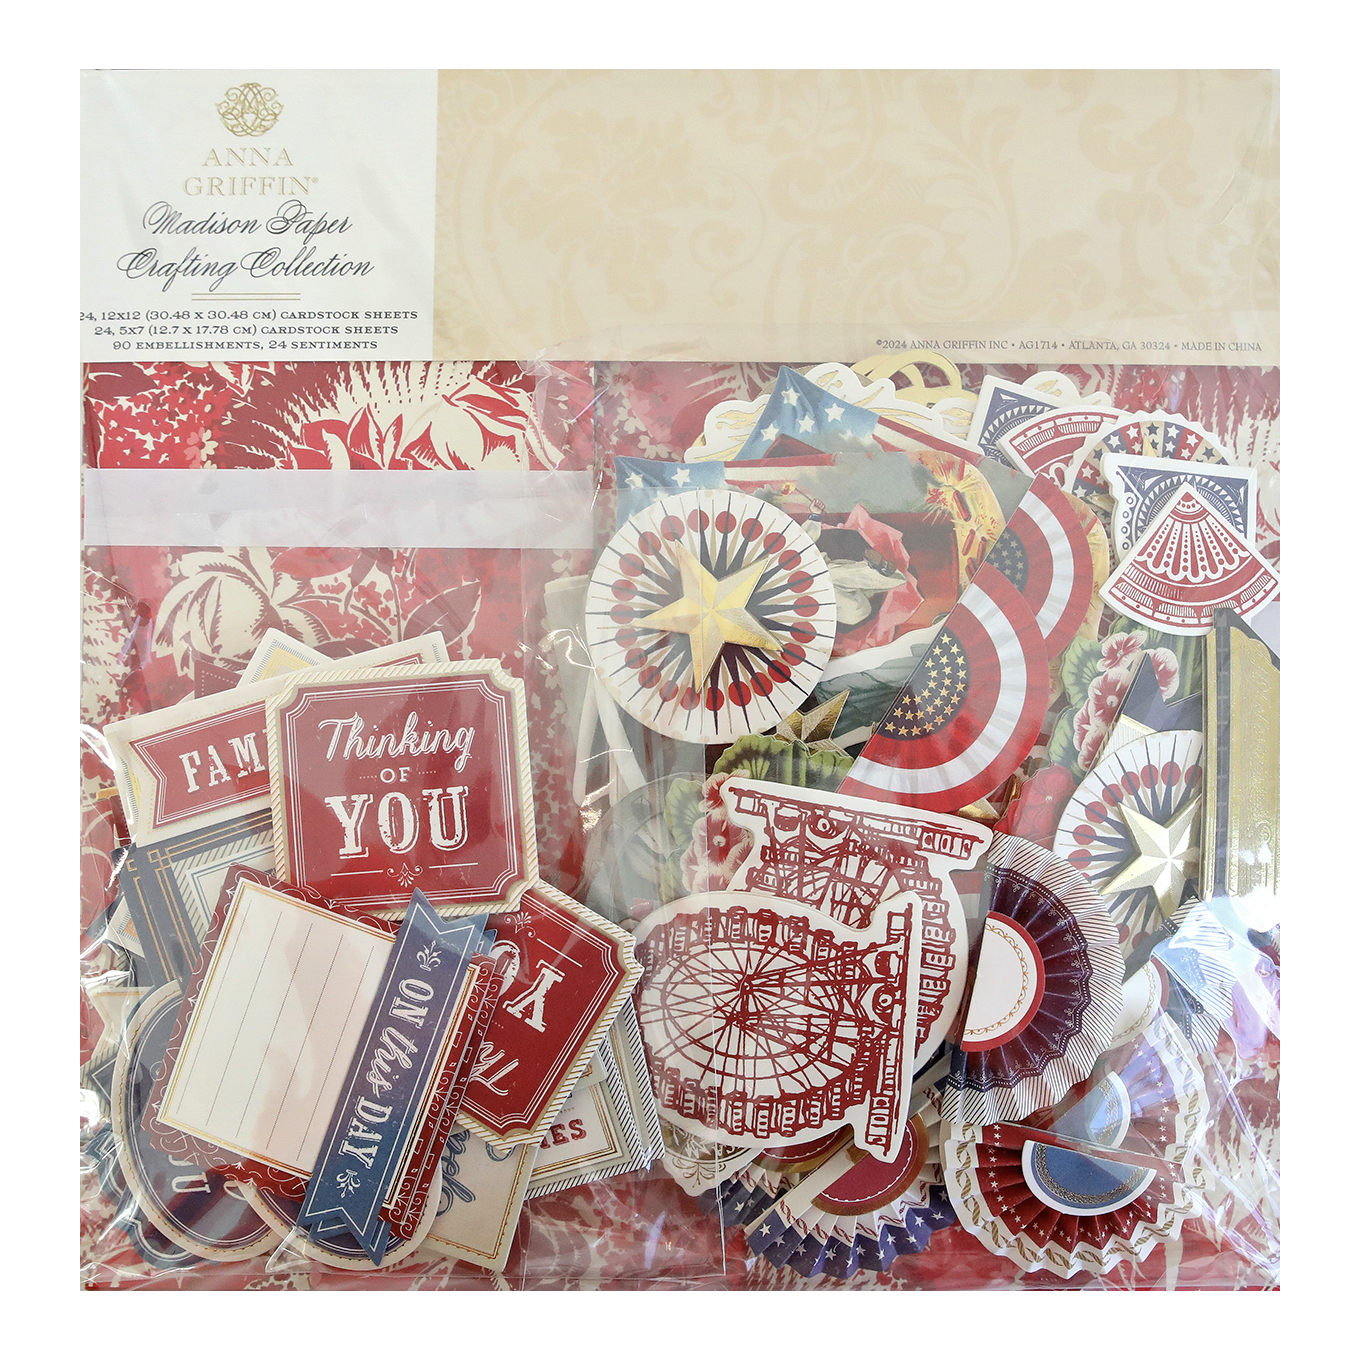 This description features the Madison Paper Crafting Collection, a vintage spirit, and patriotic embellishments.